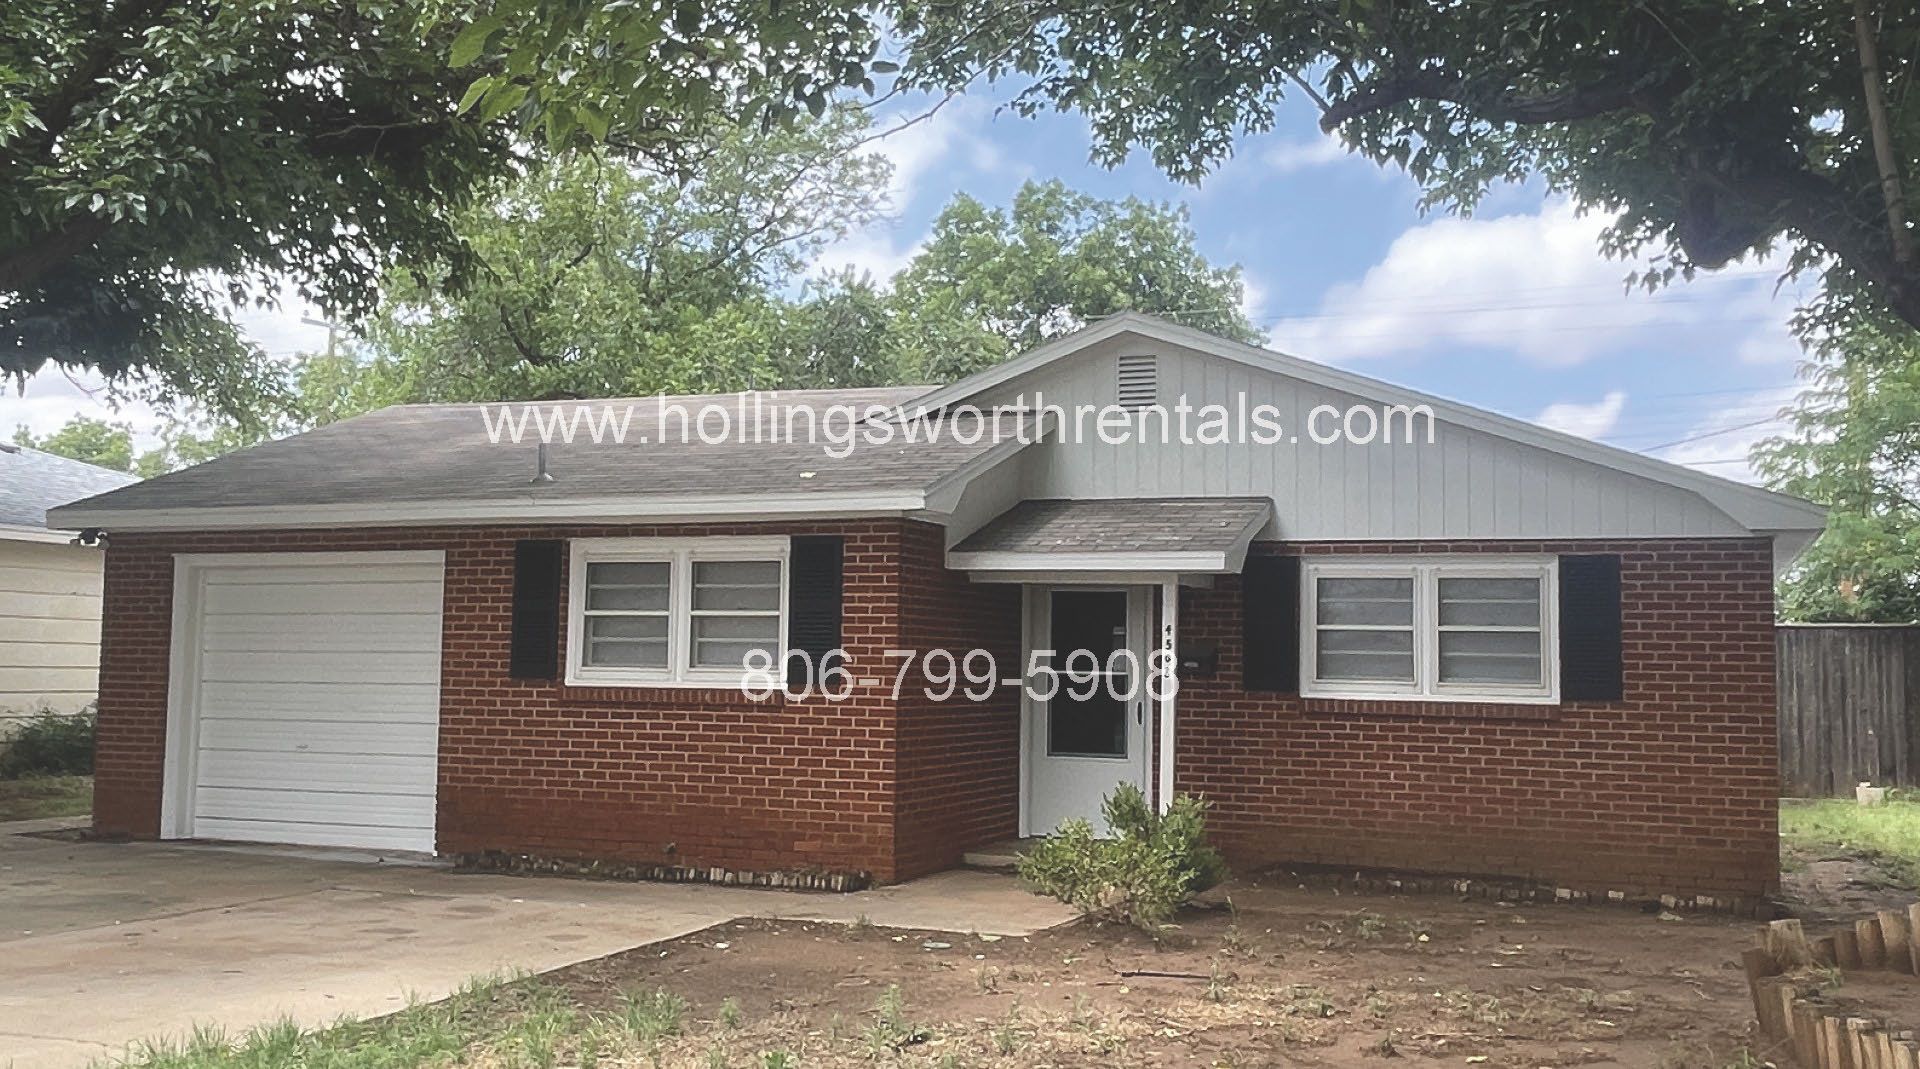 3 bedroom house with garage and storage shed